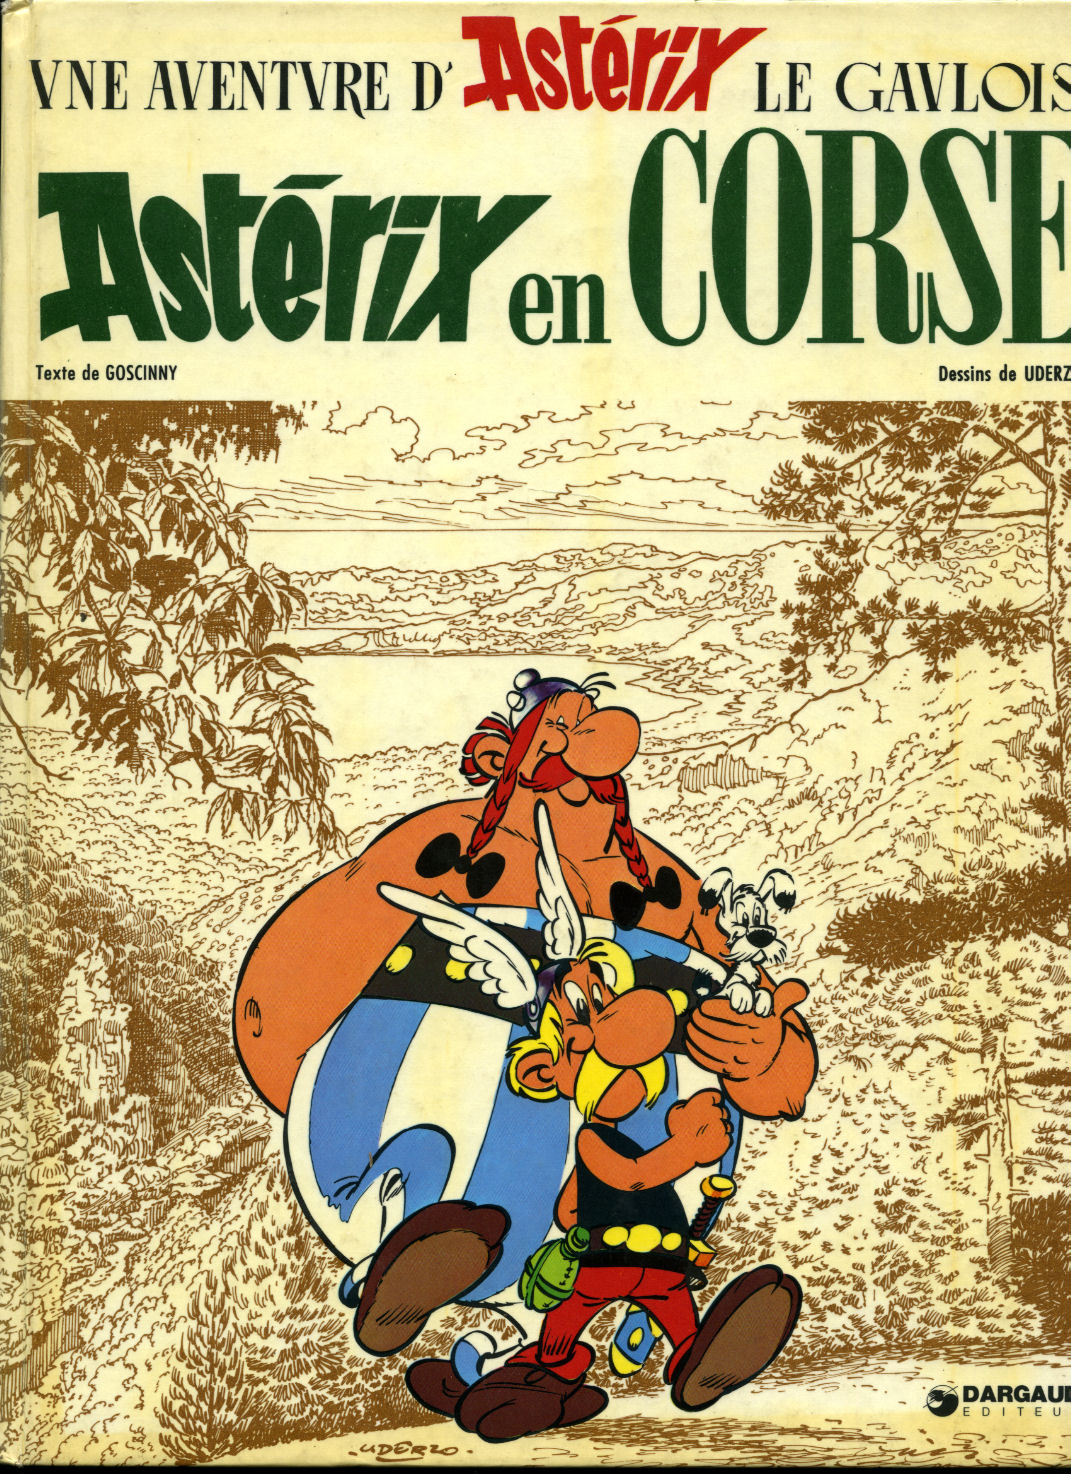 Asterix Le Gaulois (French Edition) (Asterix Graphic Novels, 1)